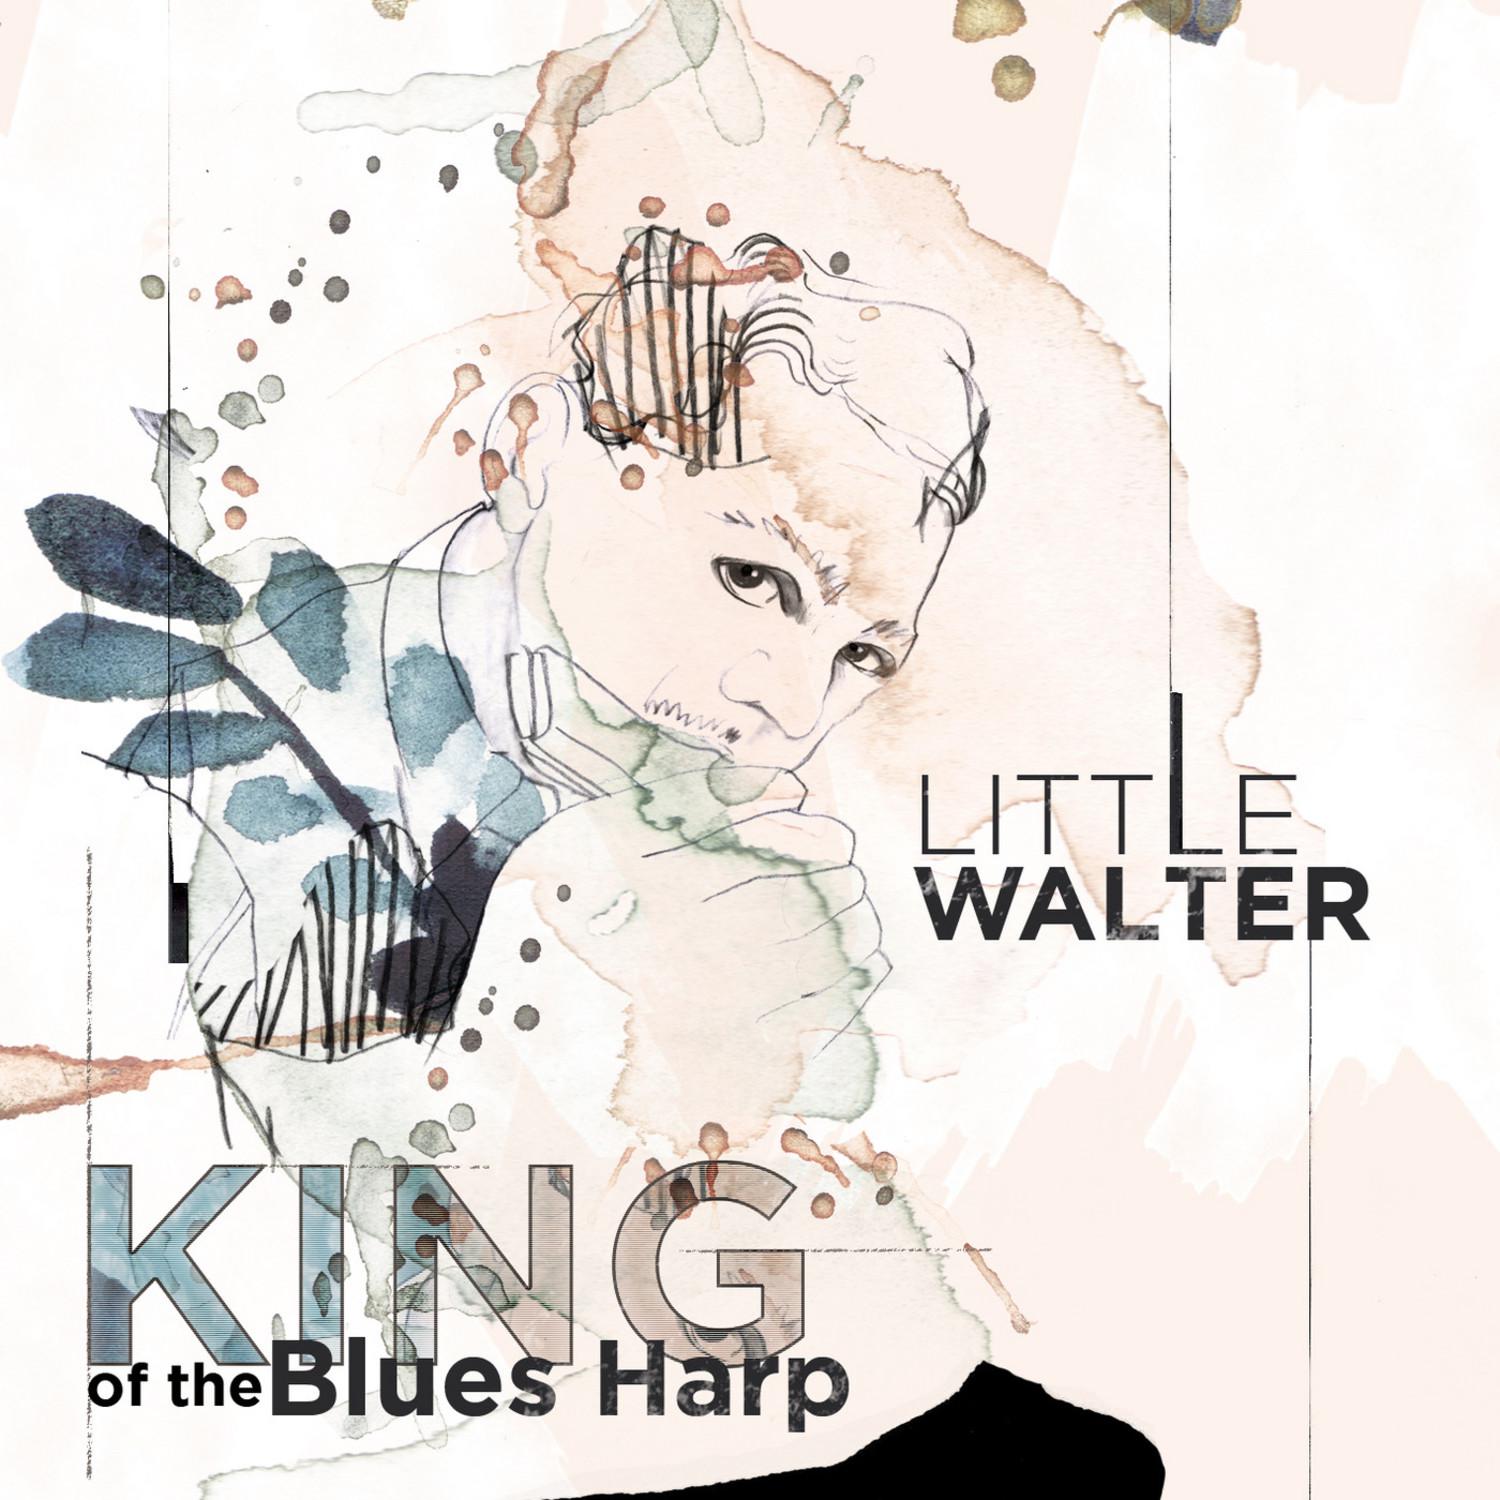 King of the Blues Harp